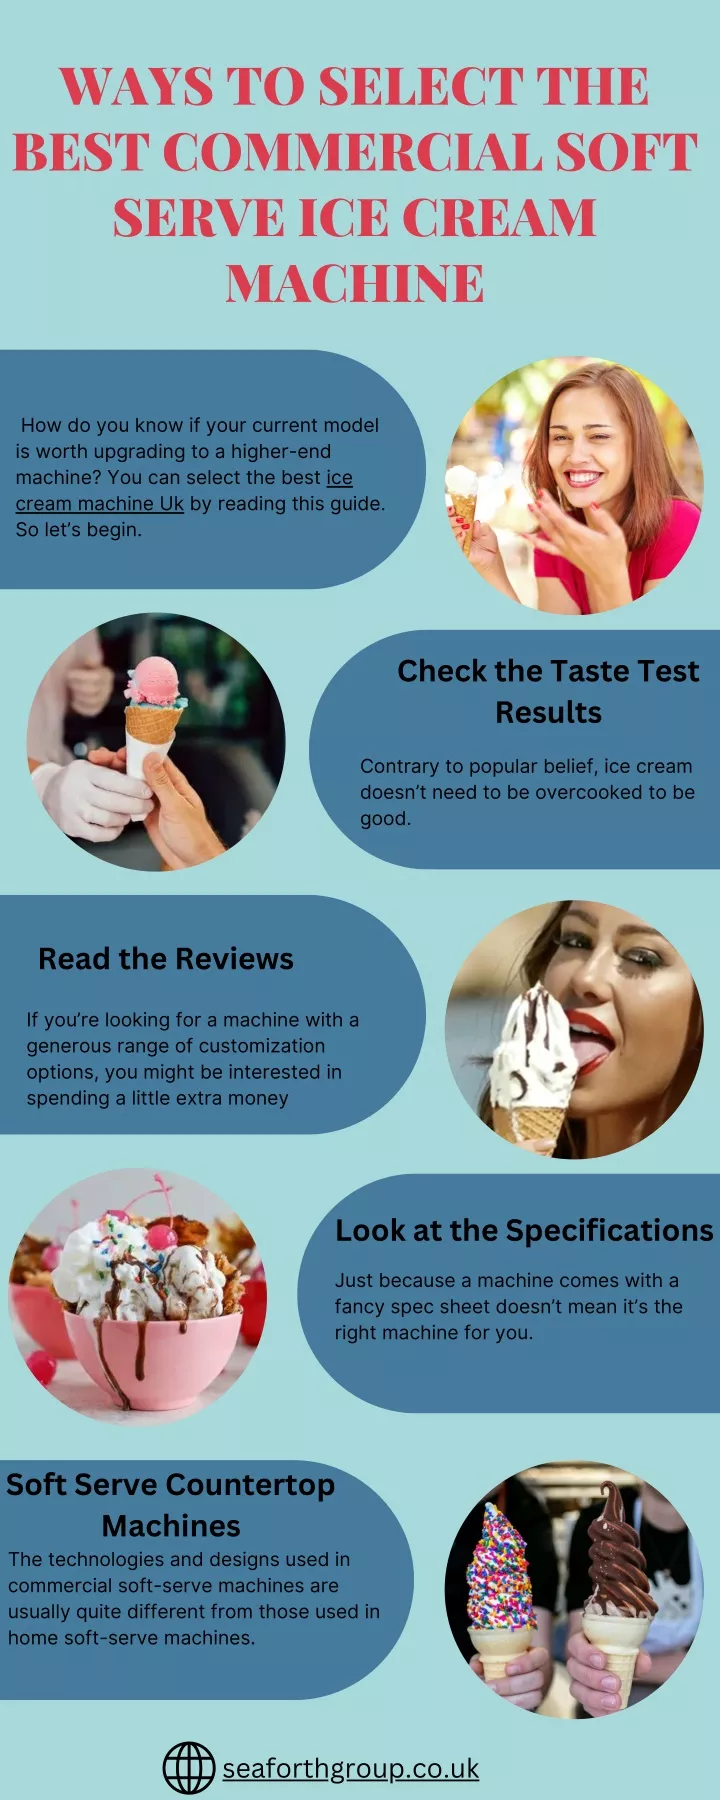 ways to select the best commercial soft serve